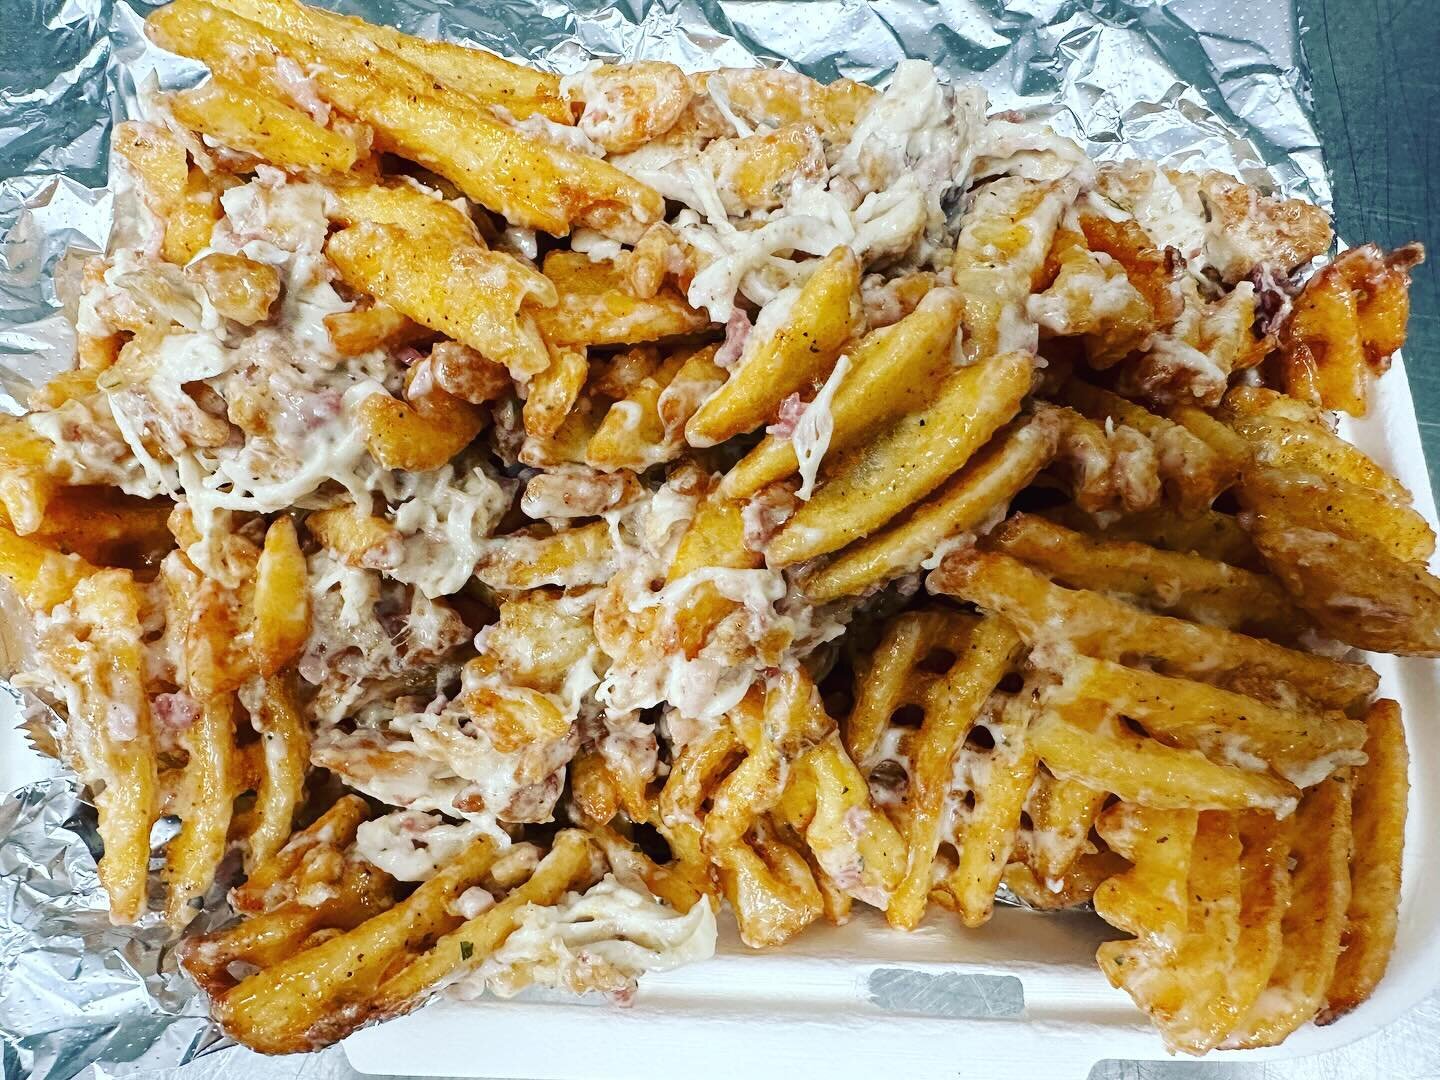 2023 is coming to an end so why not go out with a bang! Our December Special is heavily recommended by everyone who loved our Loaded Fries. Starting December 3rd, we are introducing our Chicken Bacon Ranch Loaded Fries! 

Waffle fries mixed with Chic